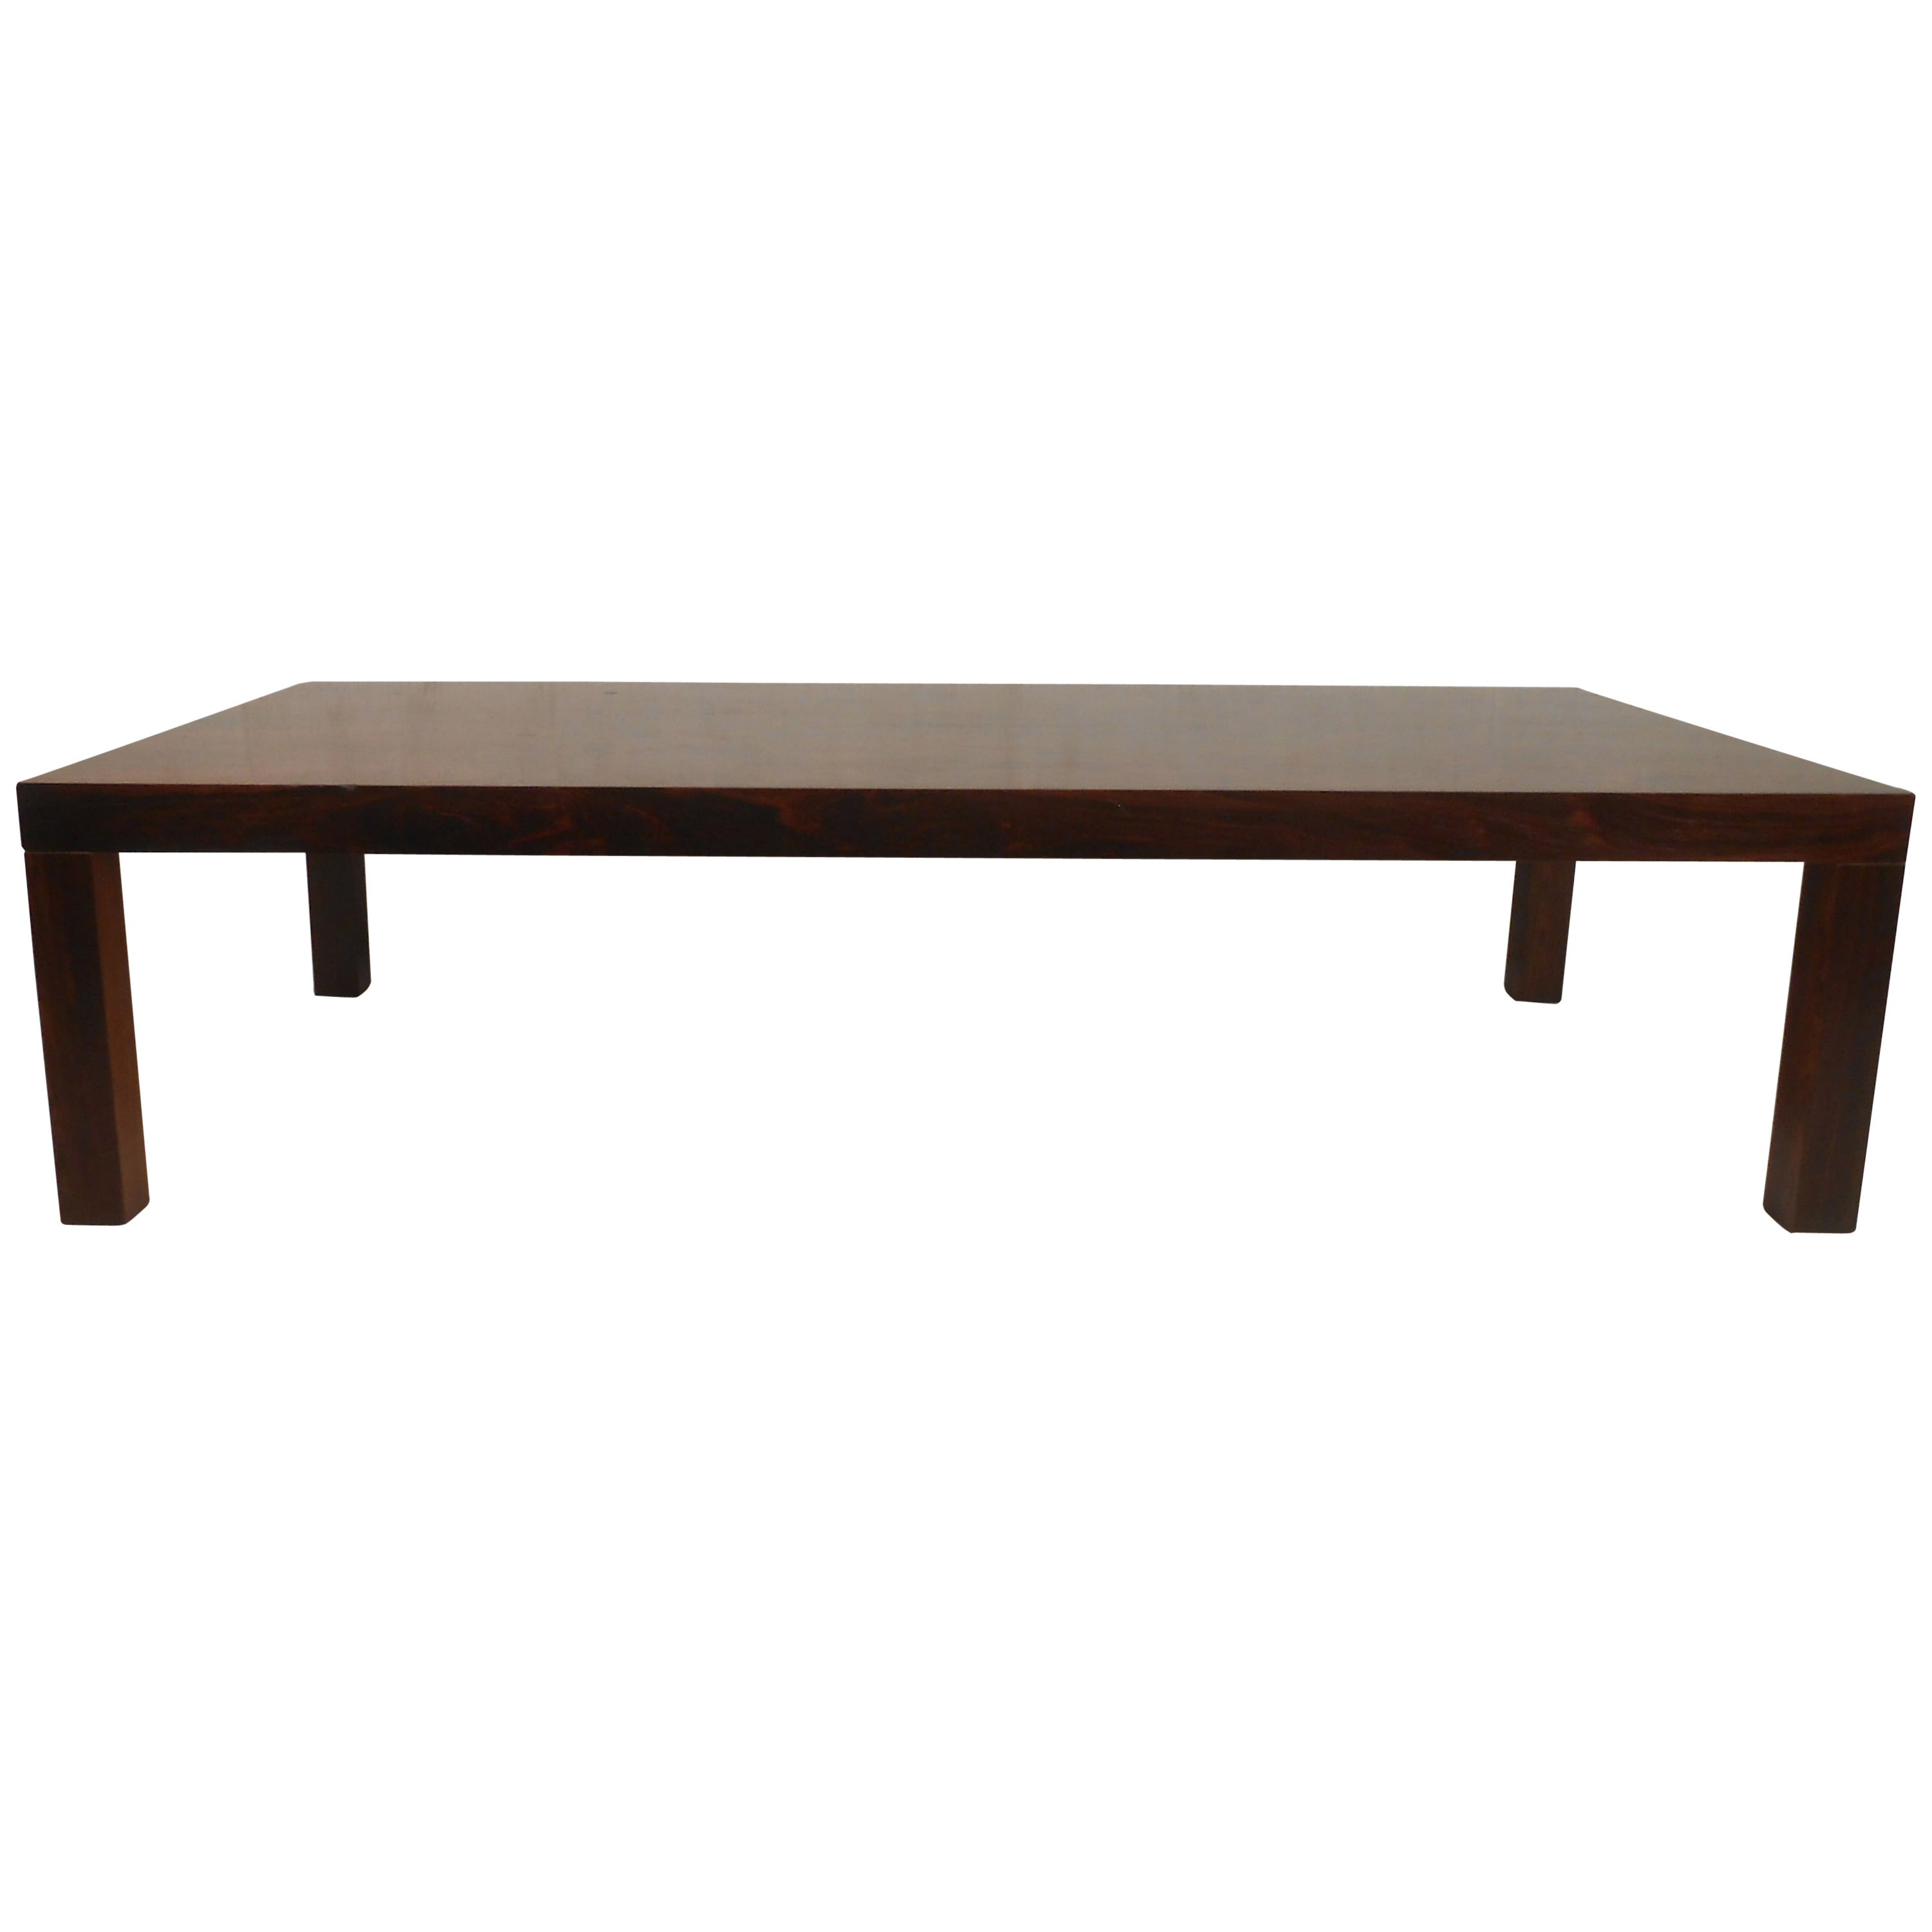 Vintage-modern Danish coffee table with beautiful rosewood grain throughout, designed by Centrum Mobler.

(Please confirm item location - NY or NJ - with dealer).